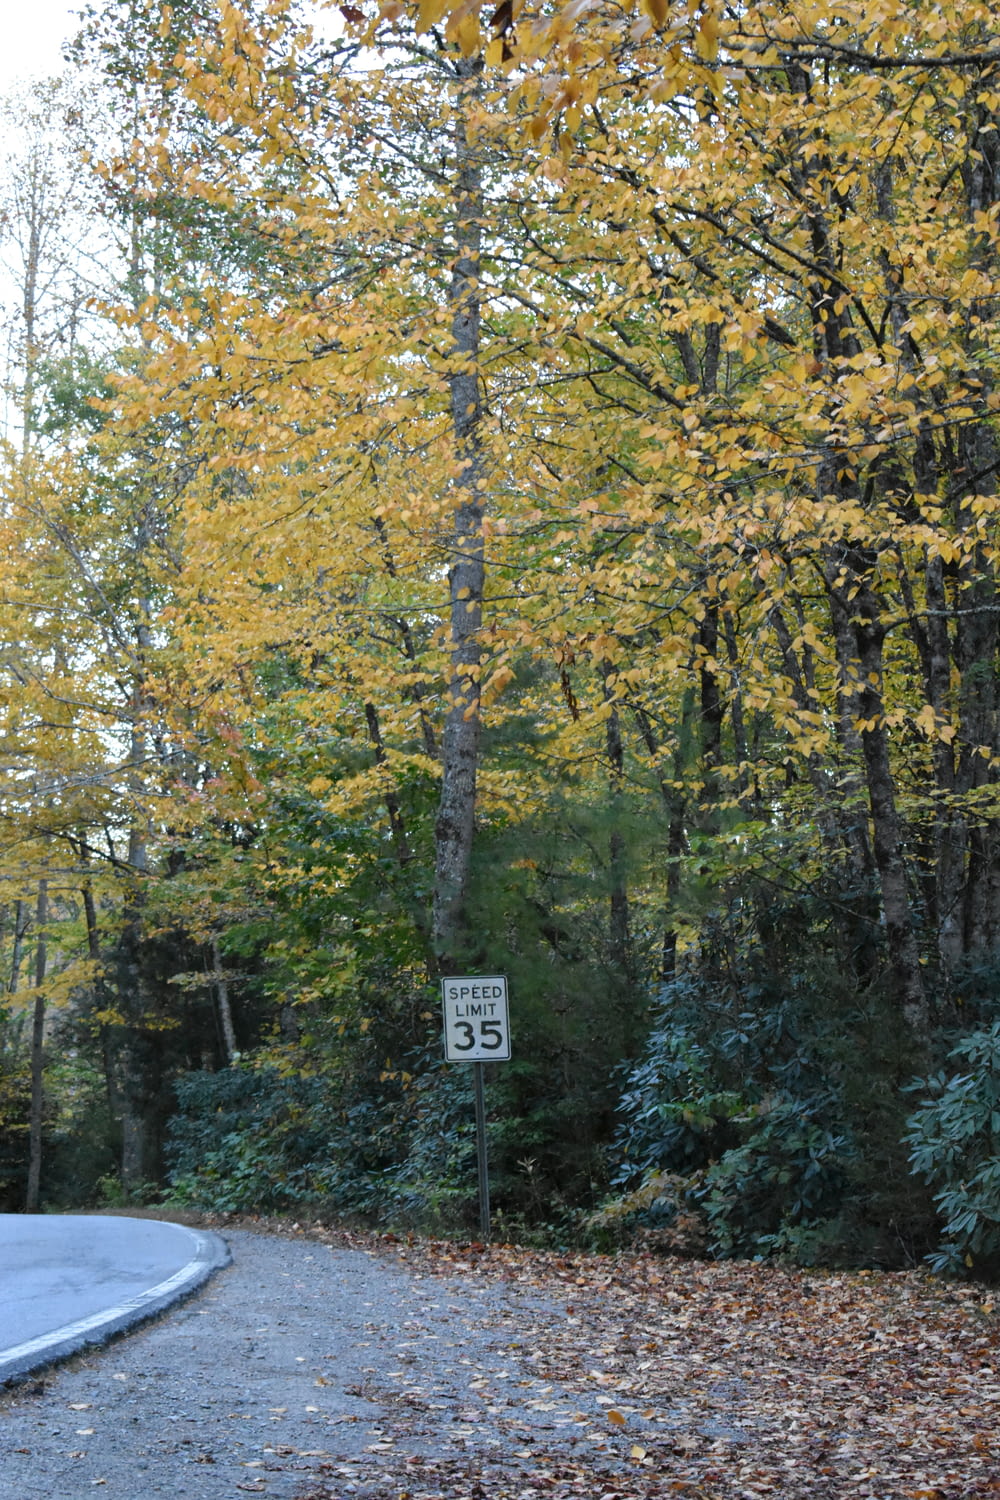 a street sign on the side of a road surrounded by trees